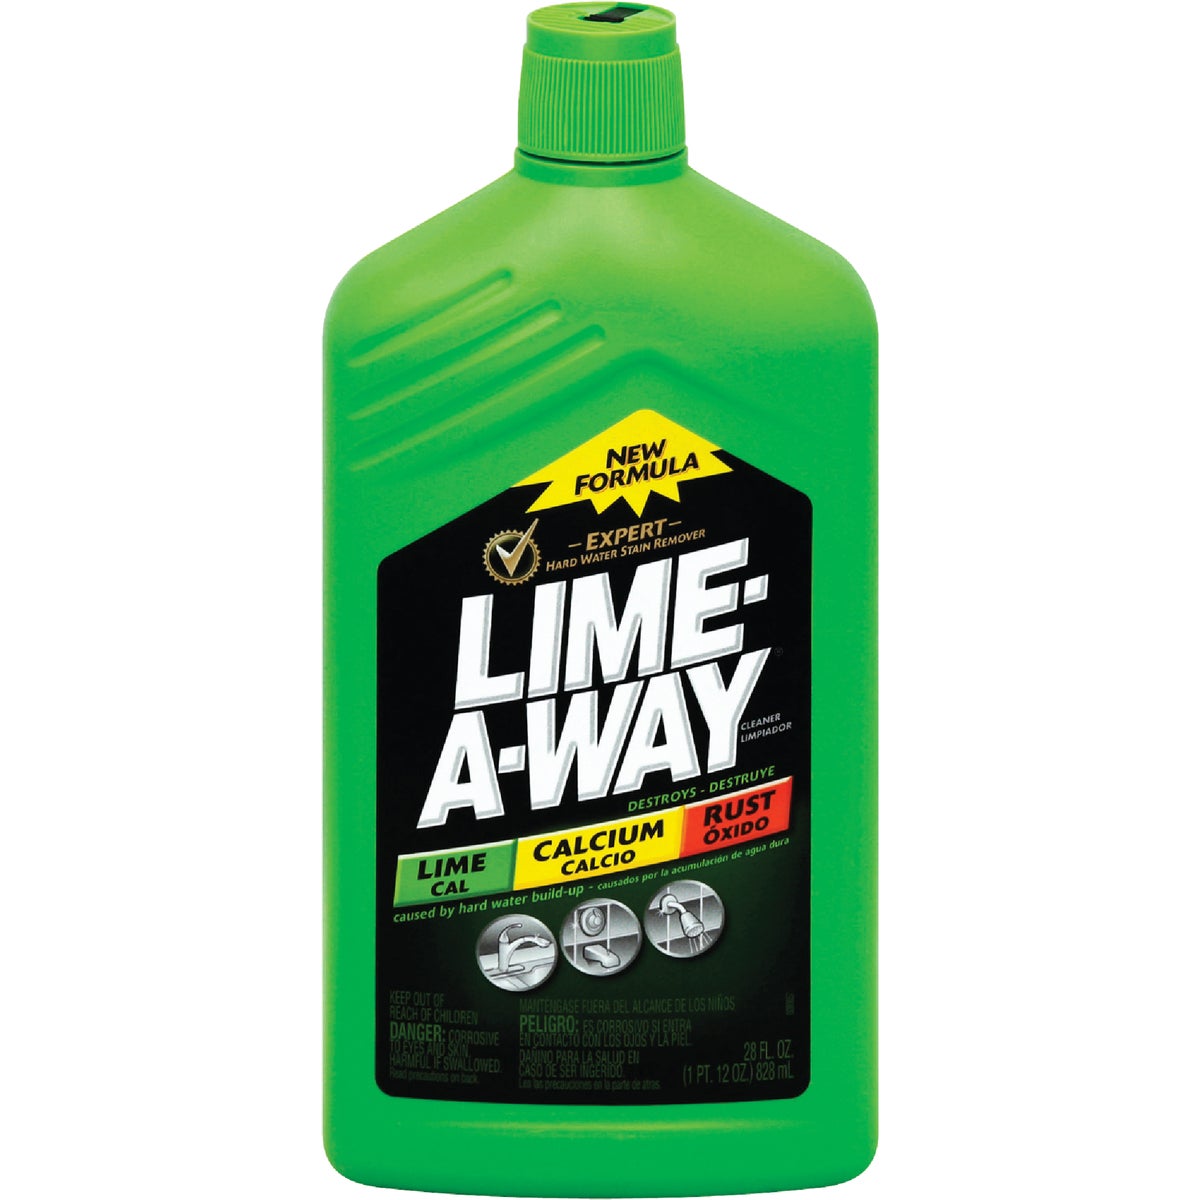 Lime-A-Way 28 Oz. Professional Strength Lime Remover